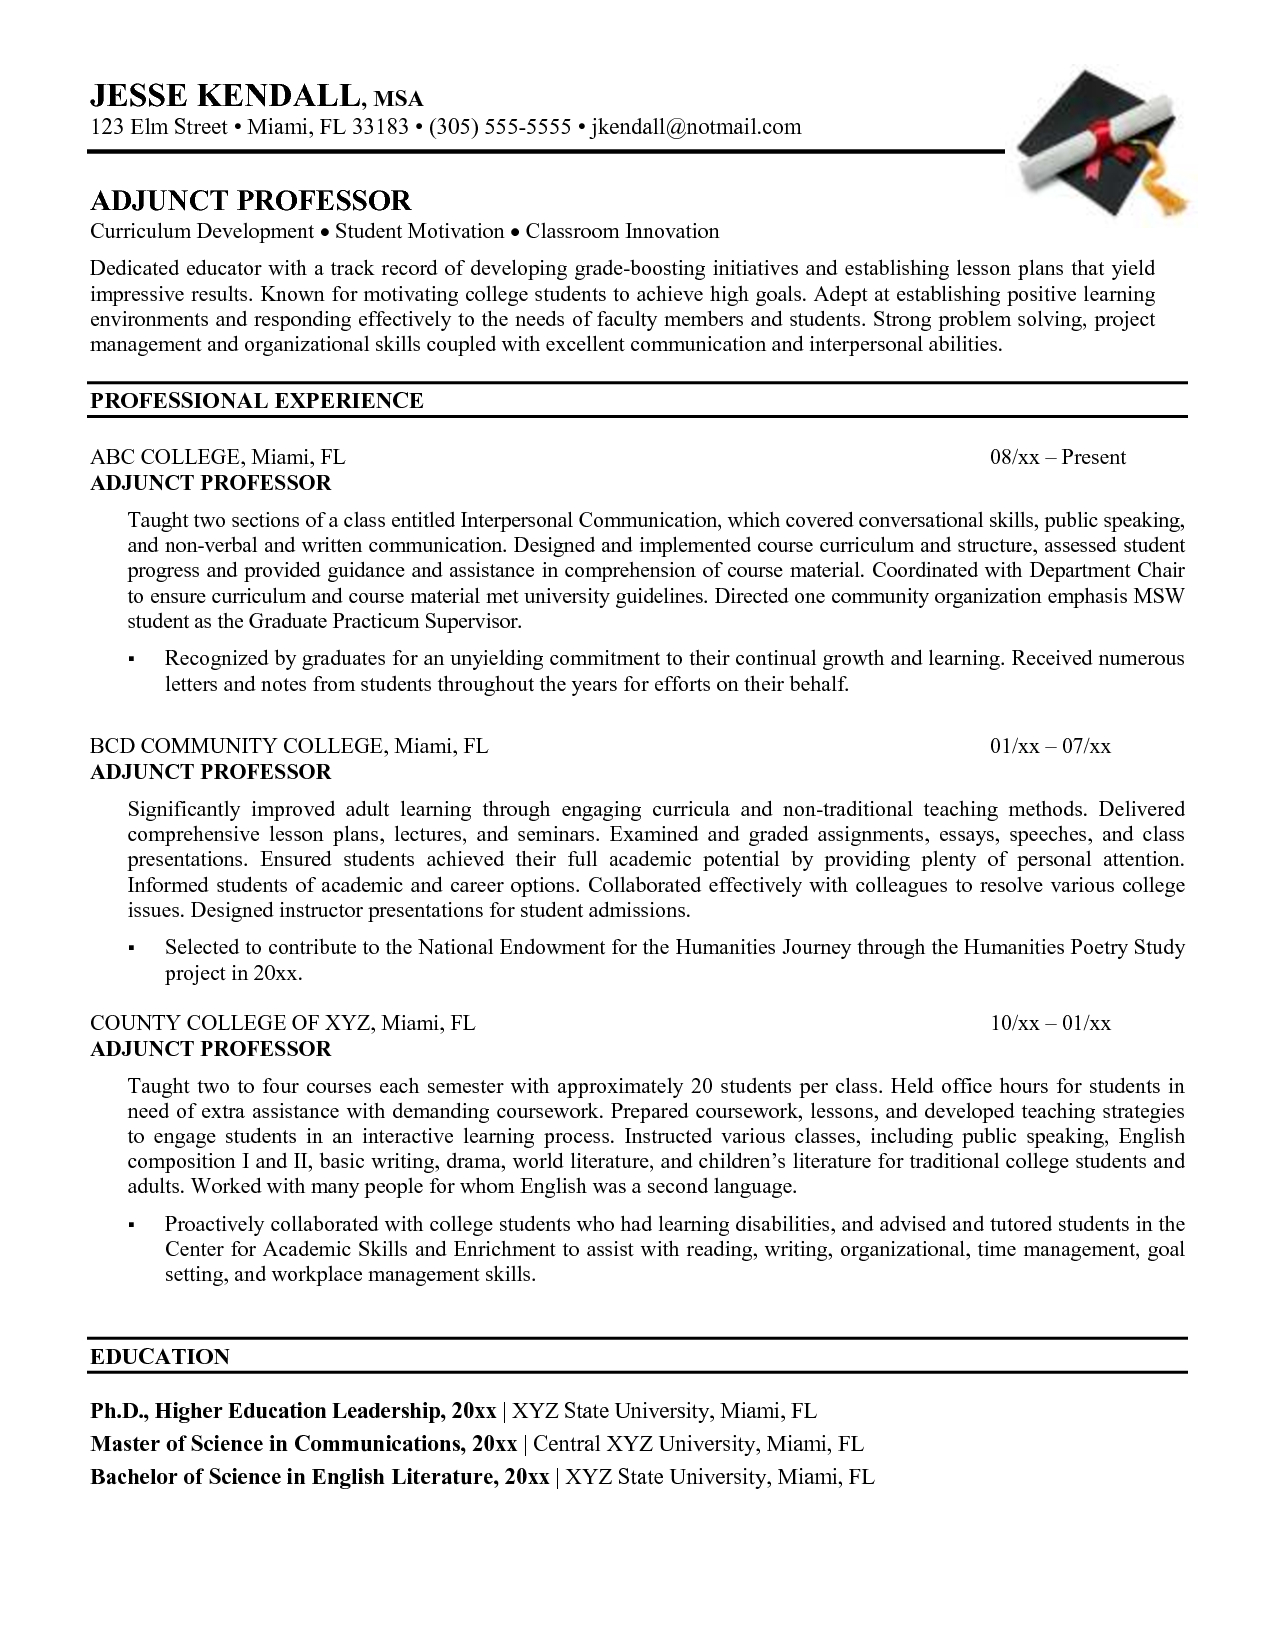 Sample Resume For Faculty Position Engineering Adjunct with proportions 1275 X 1650